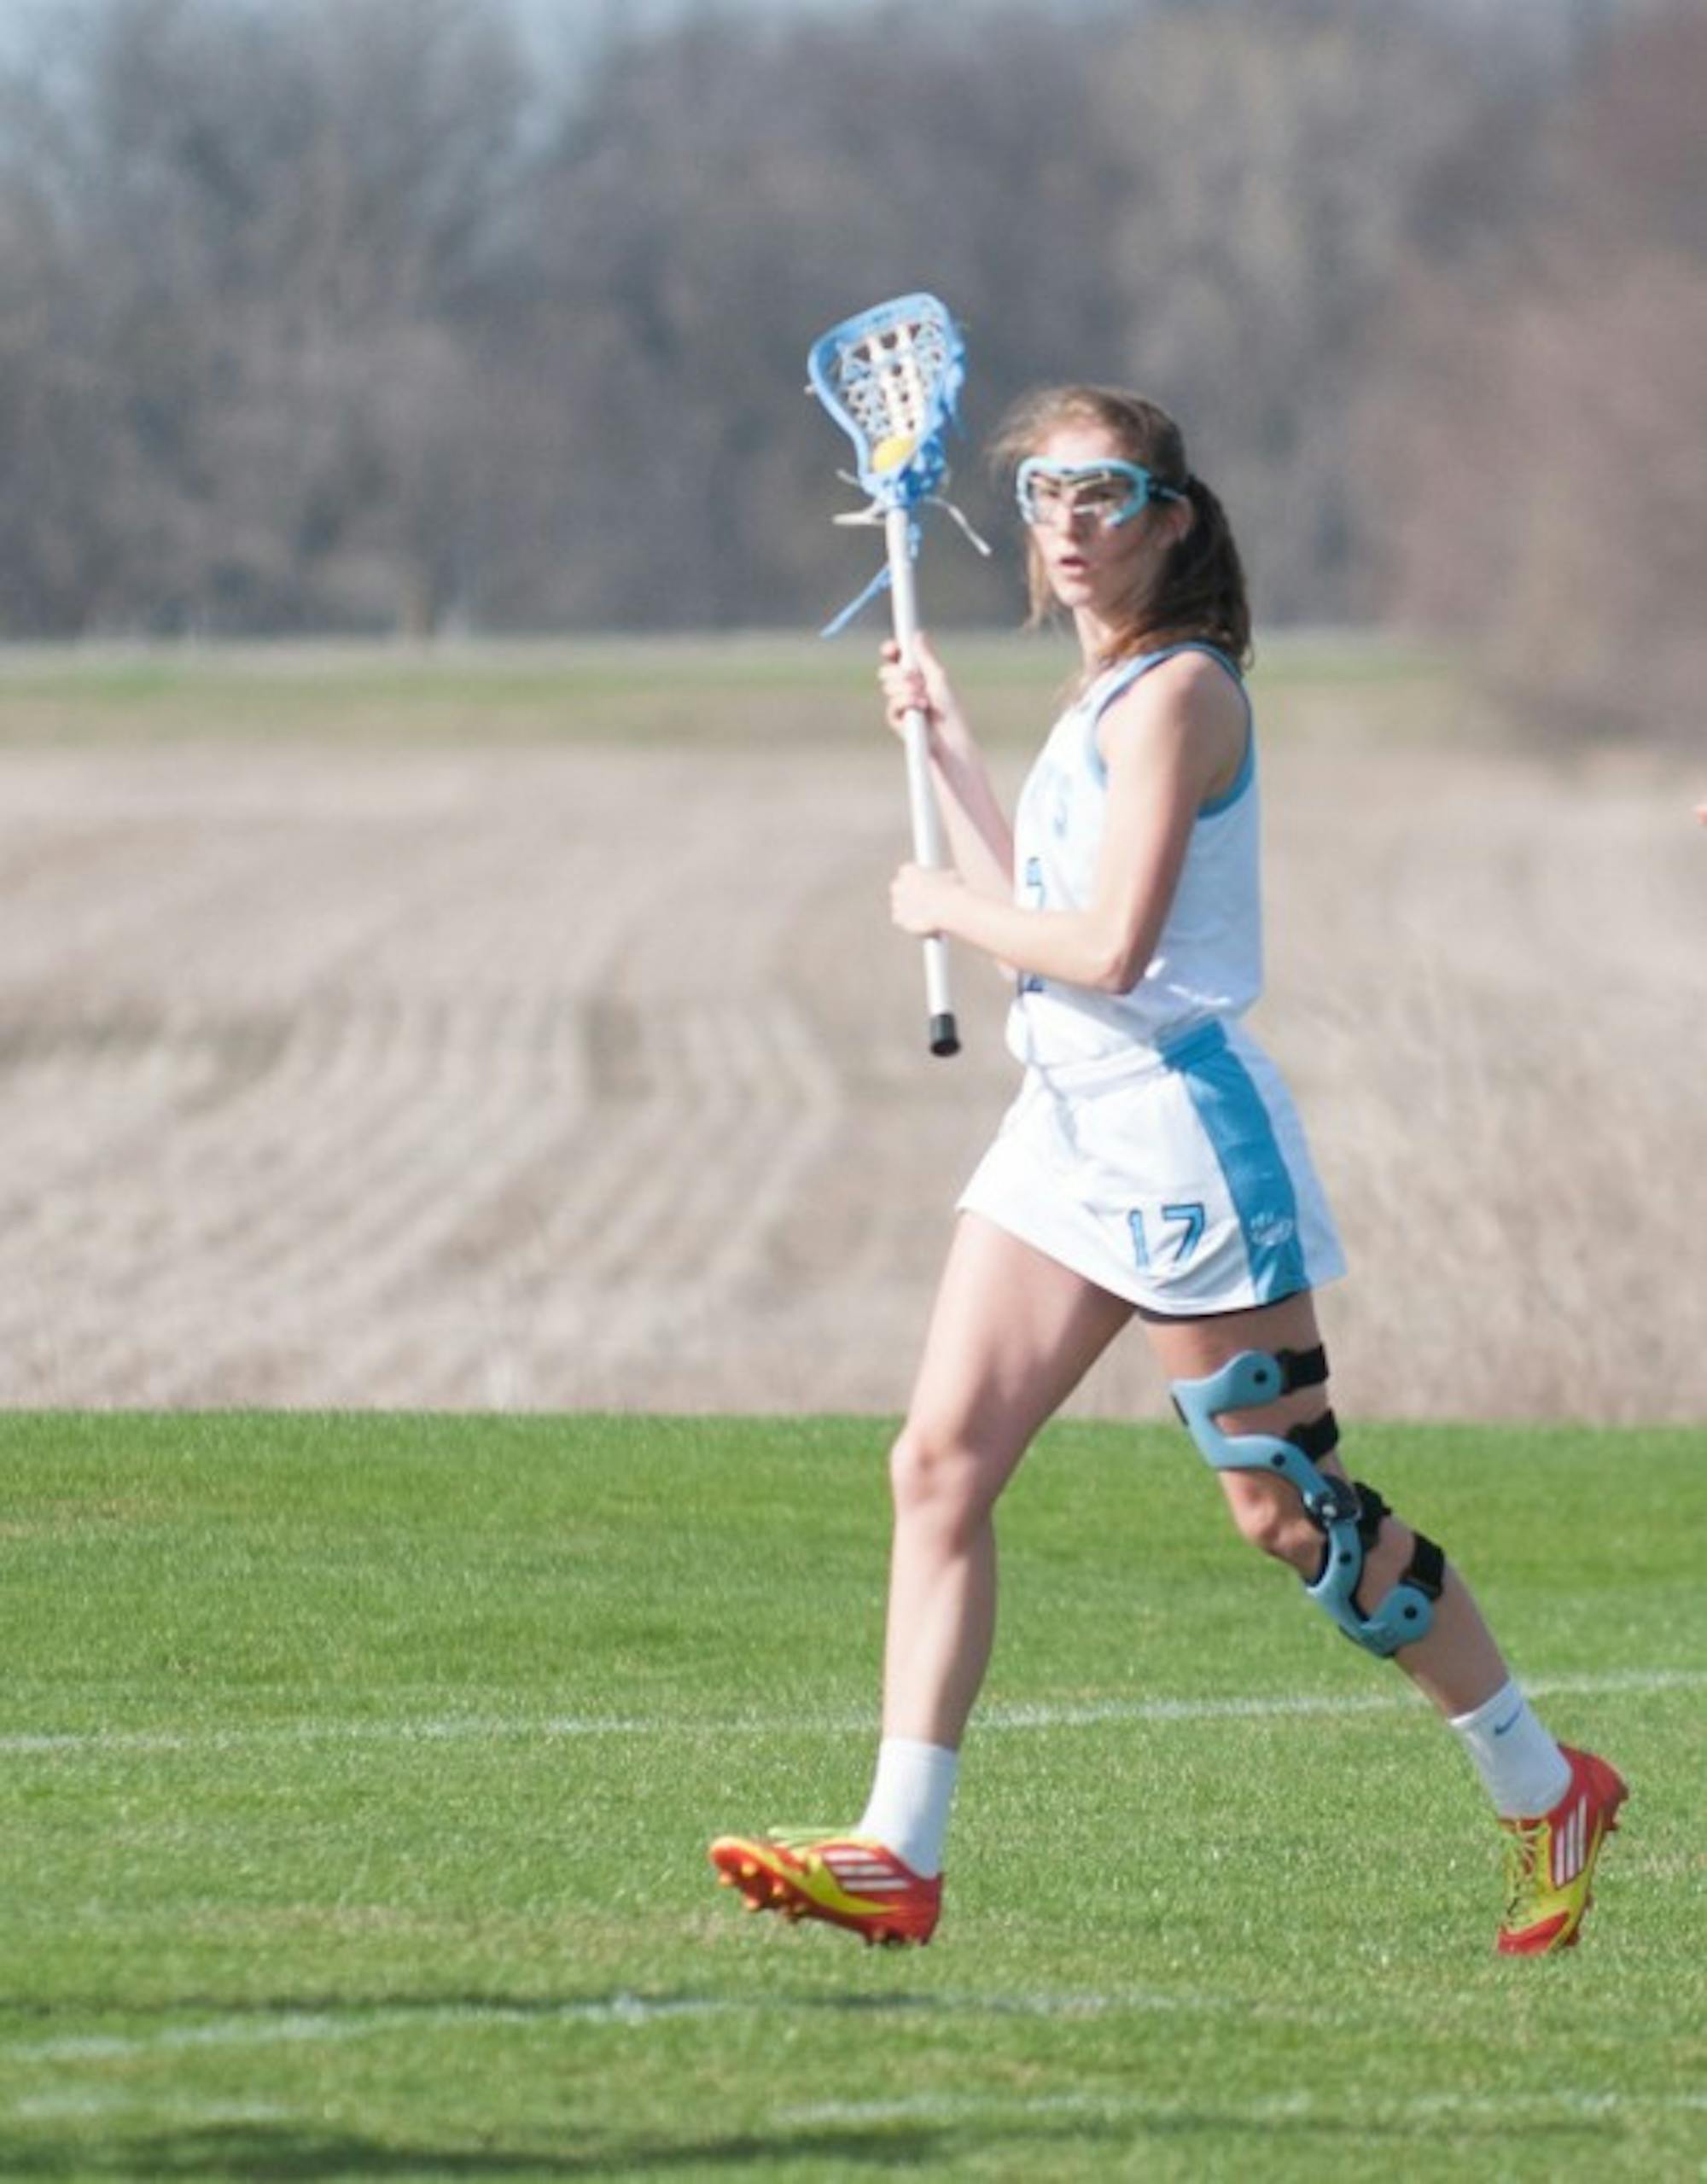 Belles sophomore attack Emilie Vanneste looks to move the ball during a 19-4 setback against Calvin on April 15.